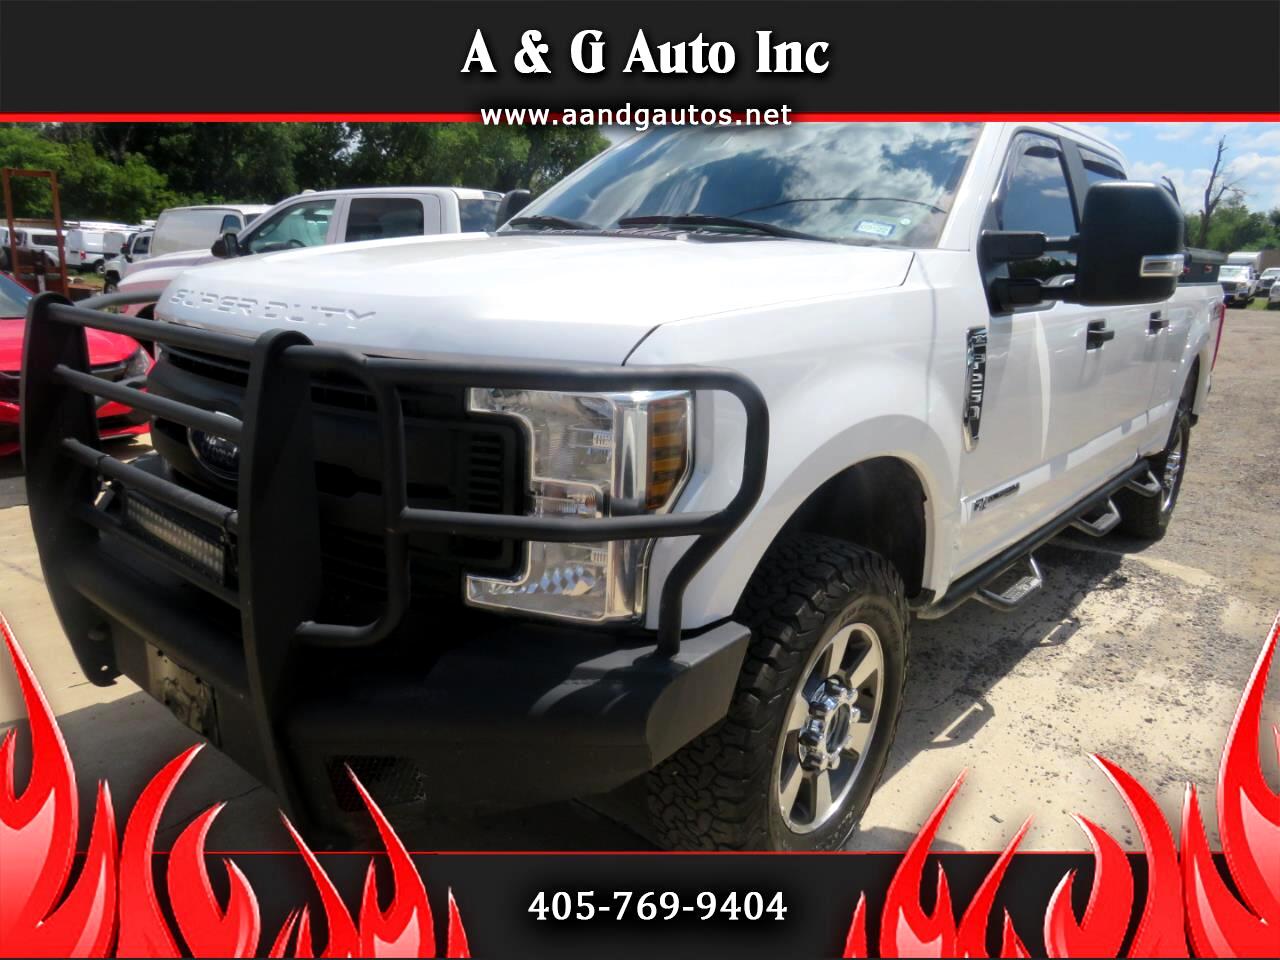 2019 Ford F-250 SD for sale in Oklahoma City OK 73141 by A & G Auto Inc